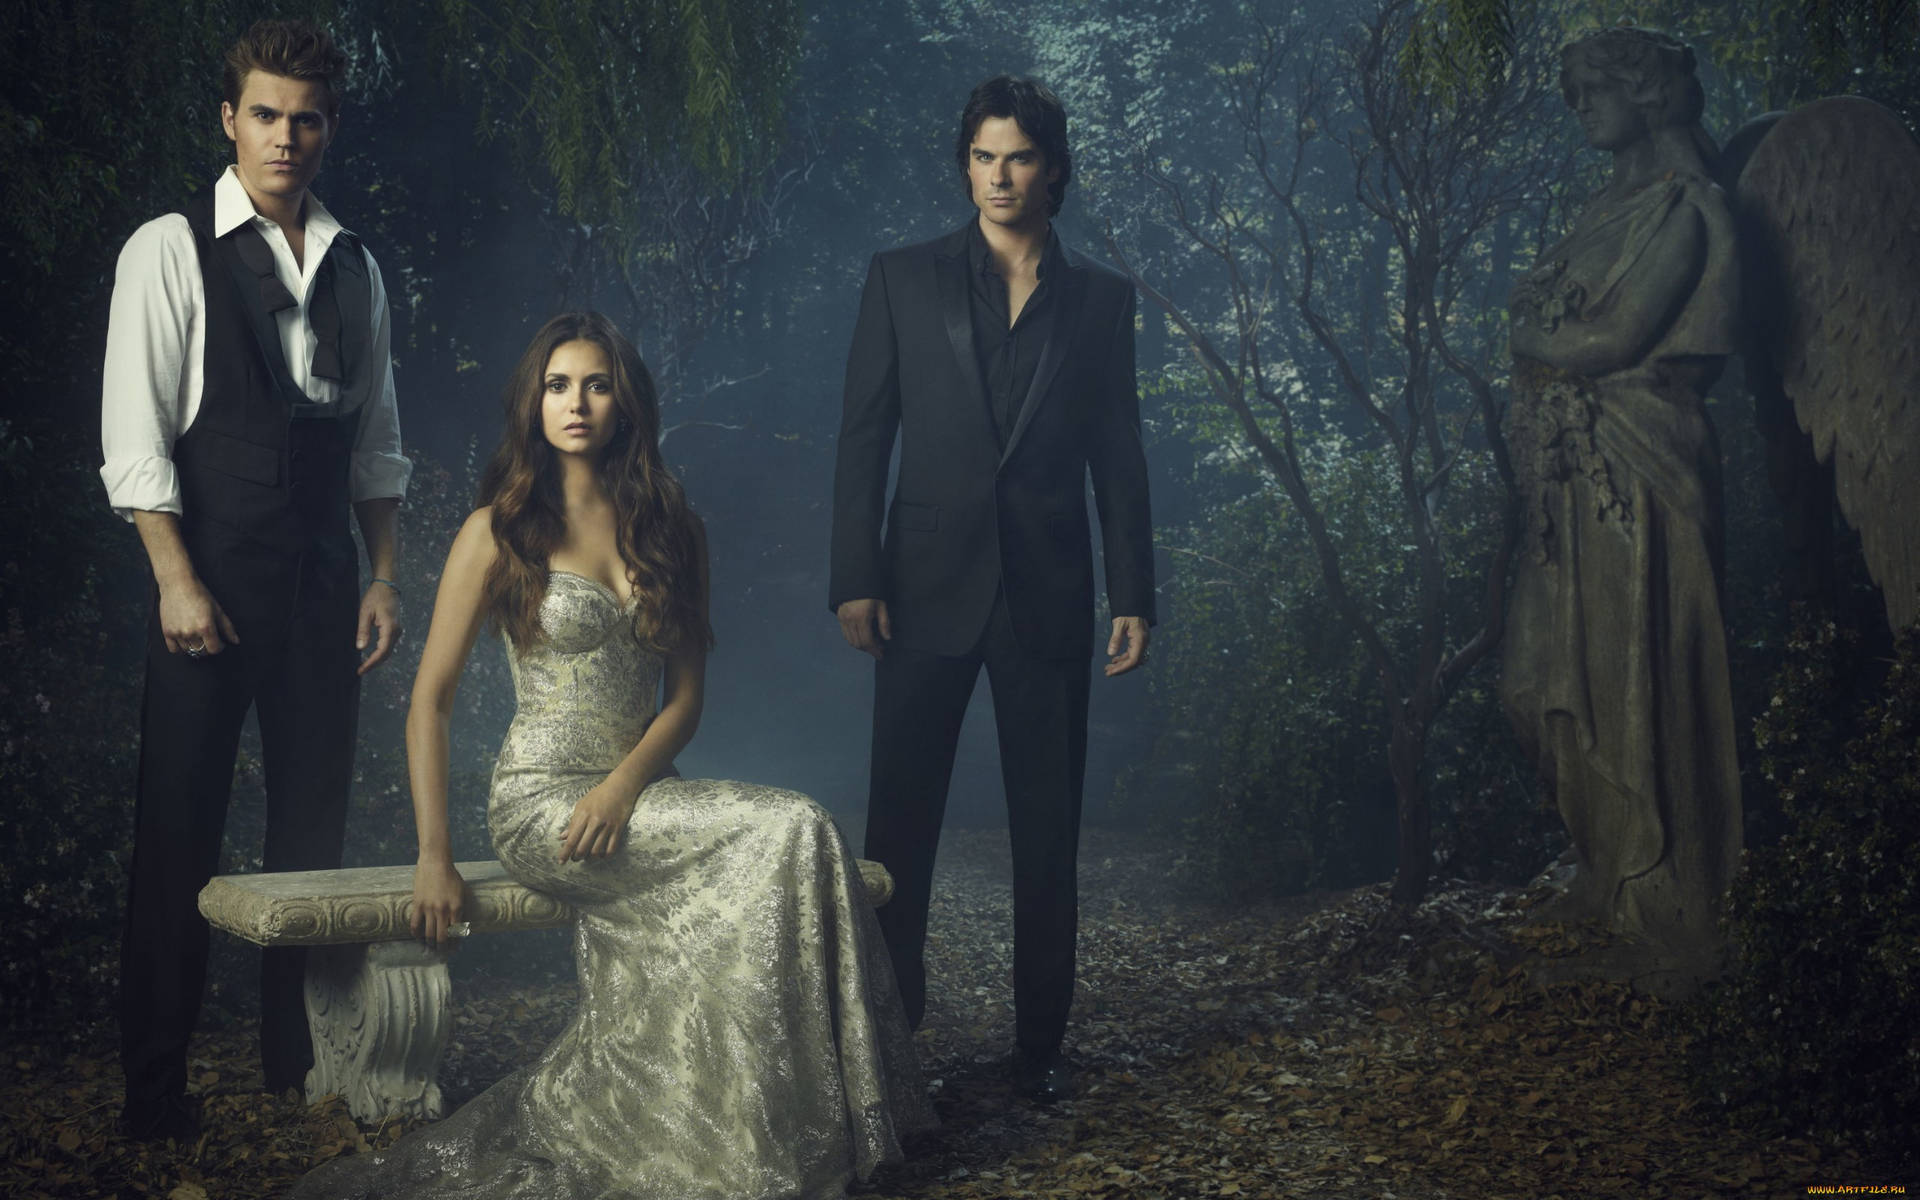 The Vampire Diaries Characters Posing With Angel Statue Wallpaper